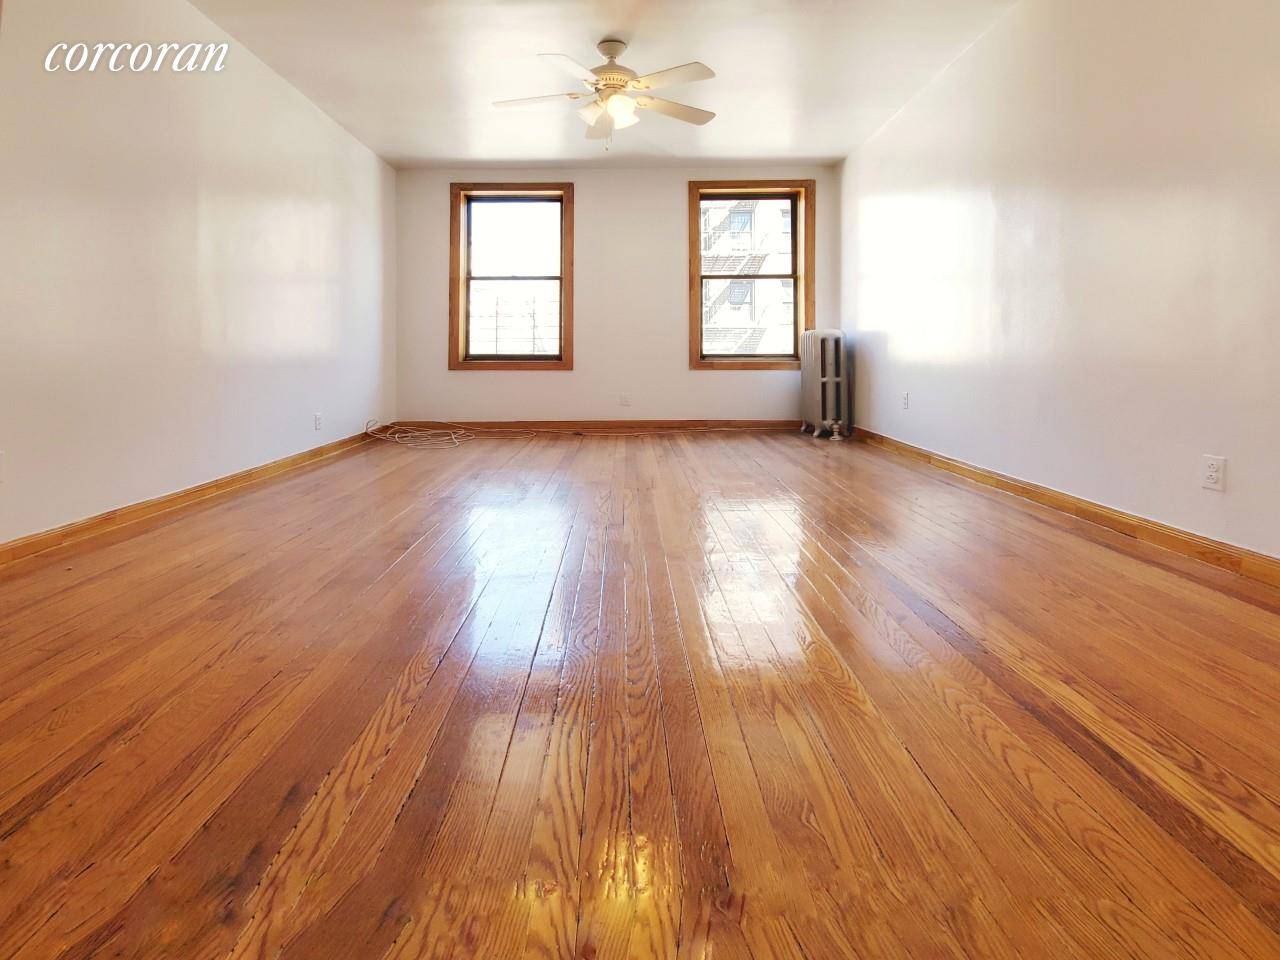 330 Wadsworth Avenue, Apartment 5F is an enormous, newly renovated 4 bedroom apartment, located in prime Washington Heights on a quiet, picturesque, tree lined block, nestled between Fort Tryon and ...